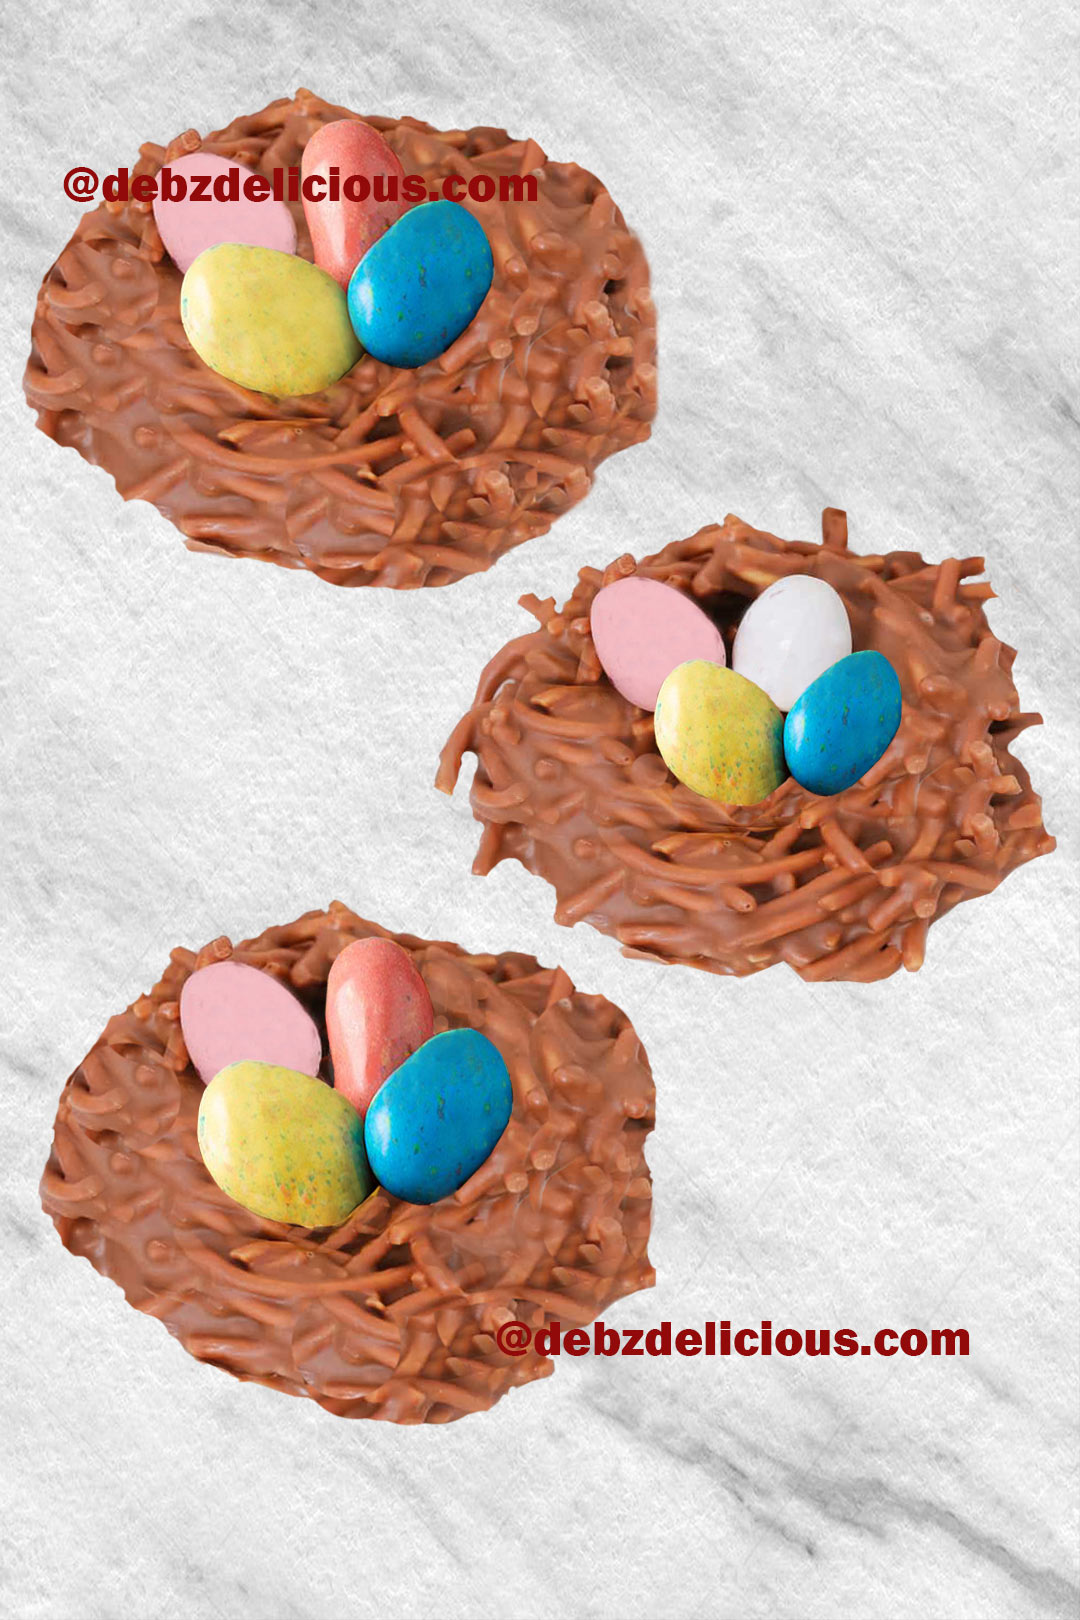 Chocolate Easter Egg Nests Recipe, How to Make Easter Birds Nests